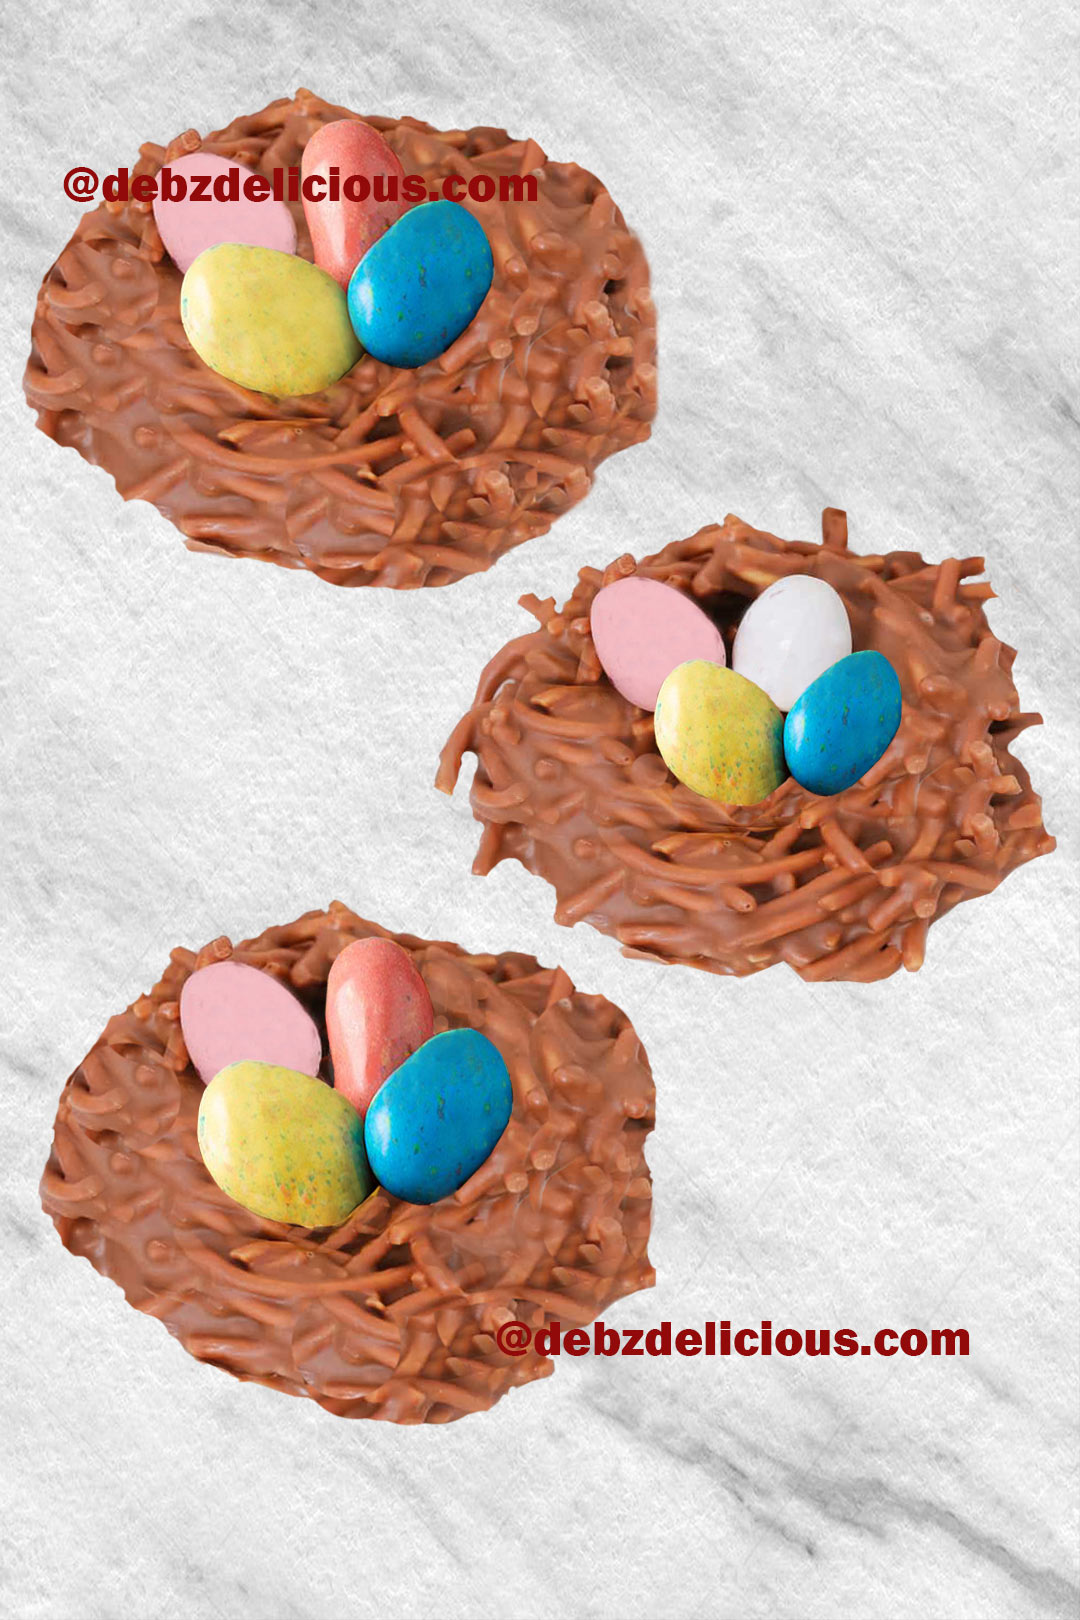 Chocolate Easter Egg Nests Recipe, How to Make Easter Birds Nests